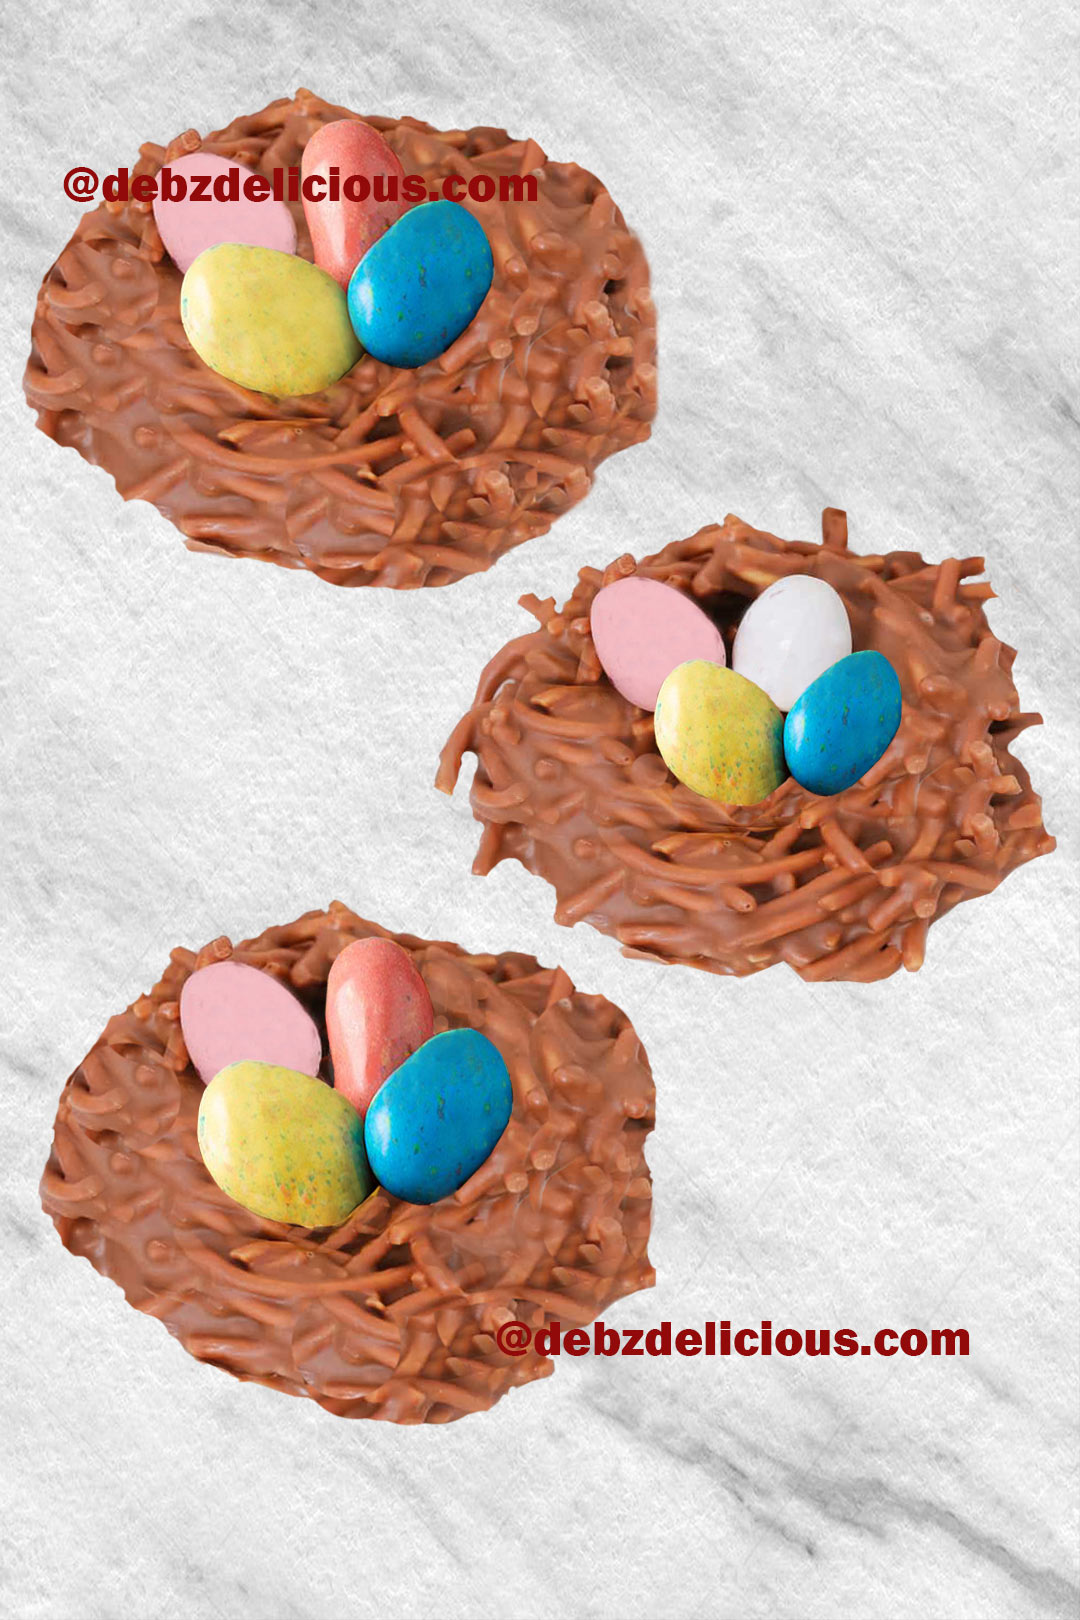 Chocolate Easter Egg Nests Recipe, How to Make Easter Birds Nests